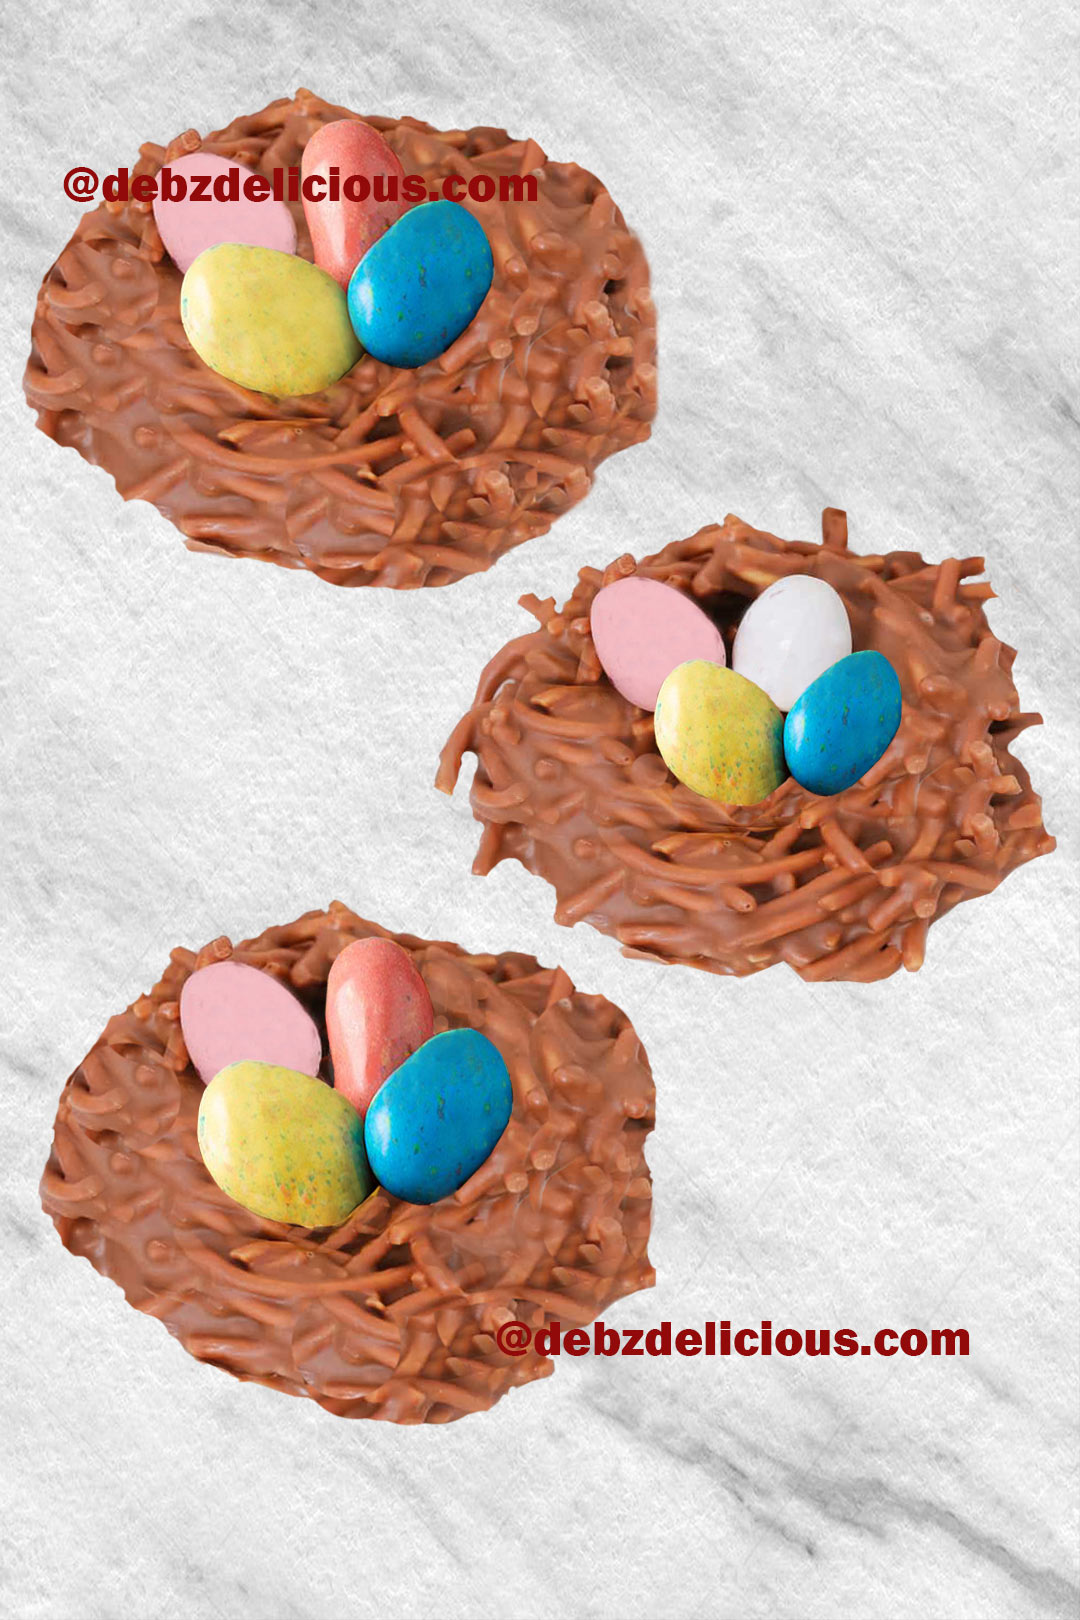 Chocolate Easter Egg Nests Recipe, How to Make Easter Birds Nests